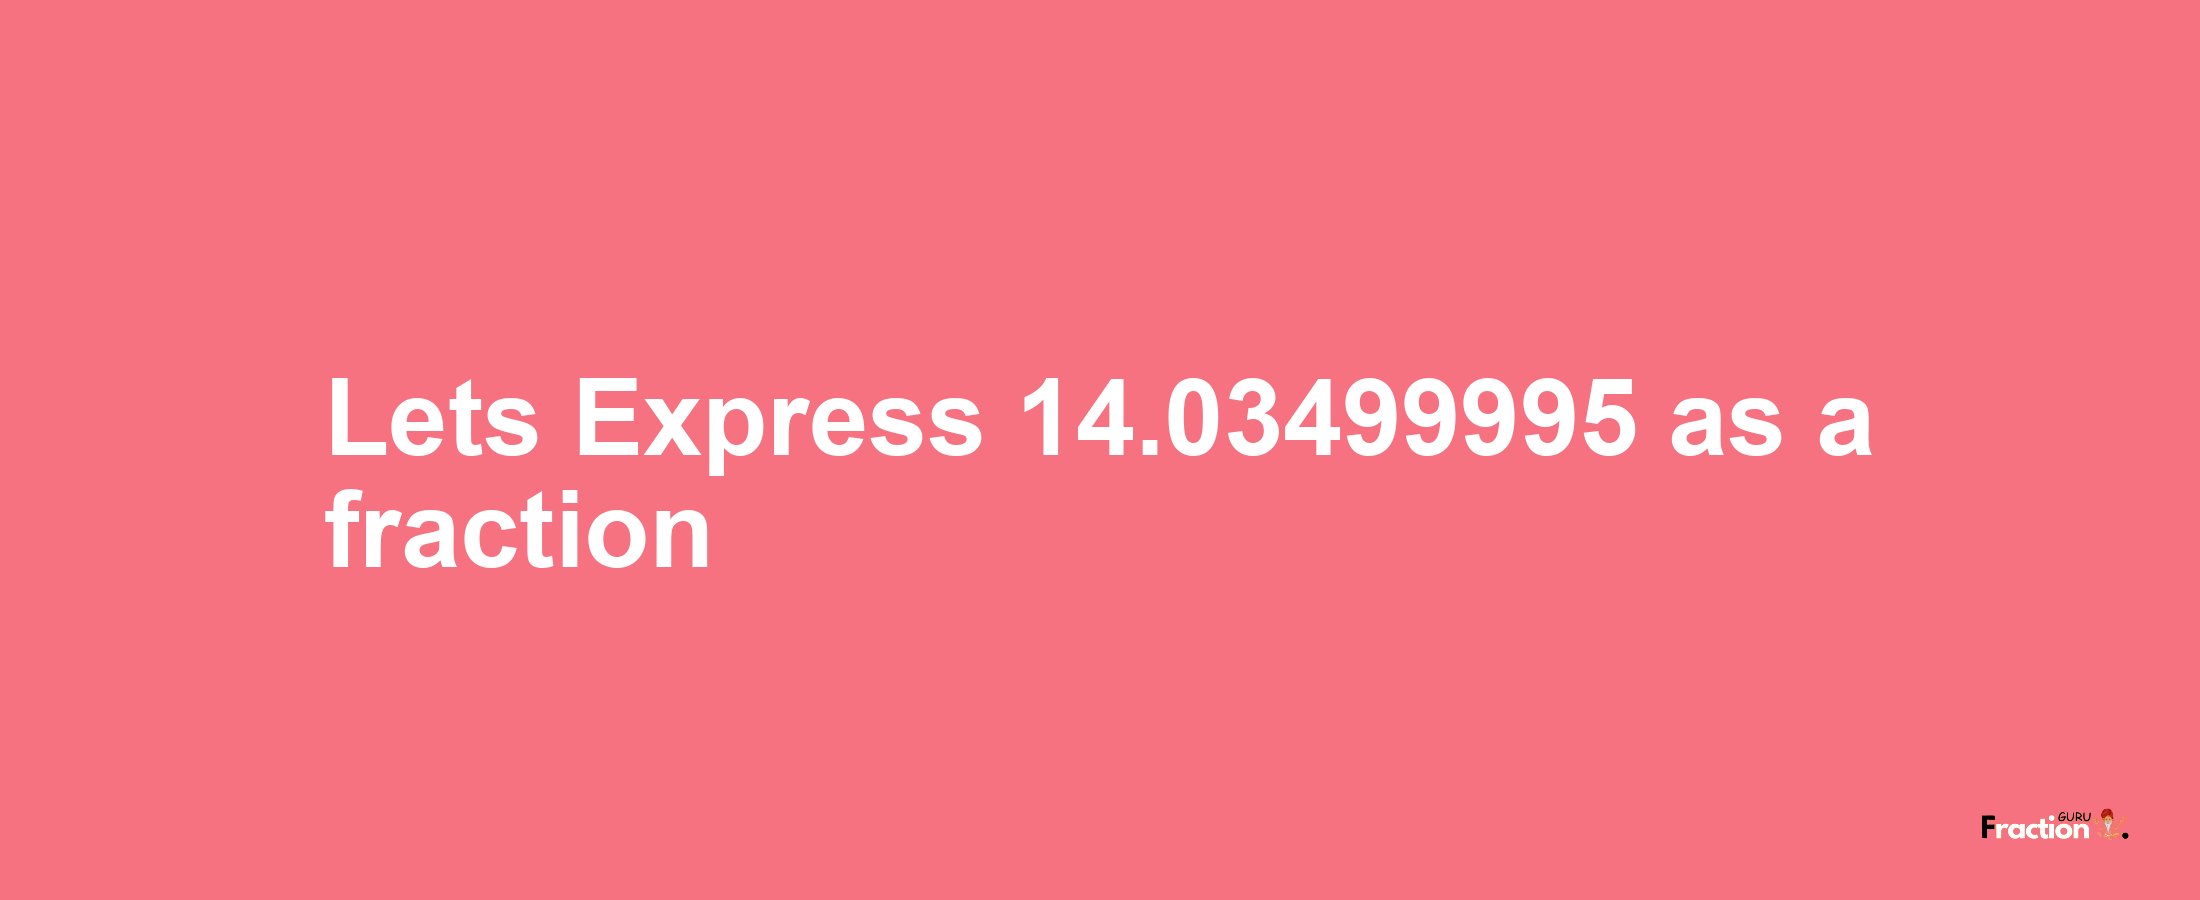 Lets Express 14.03499995 as afraction